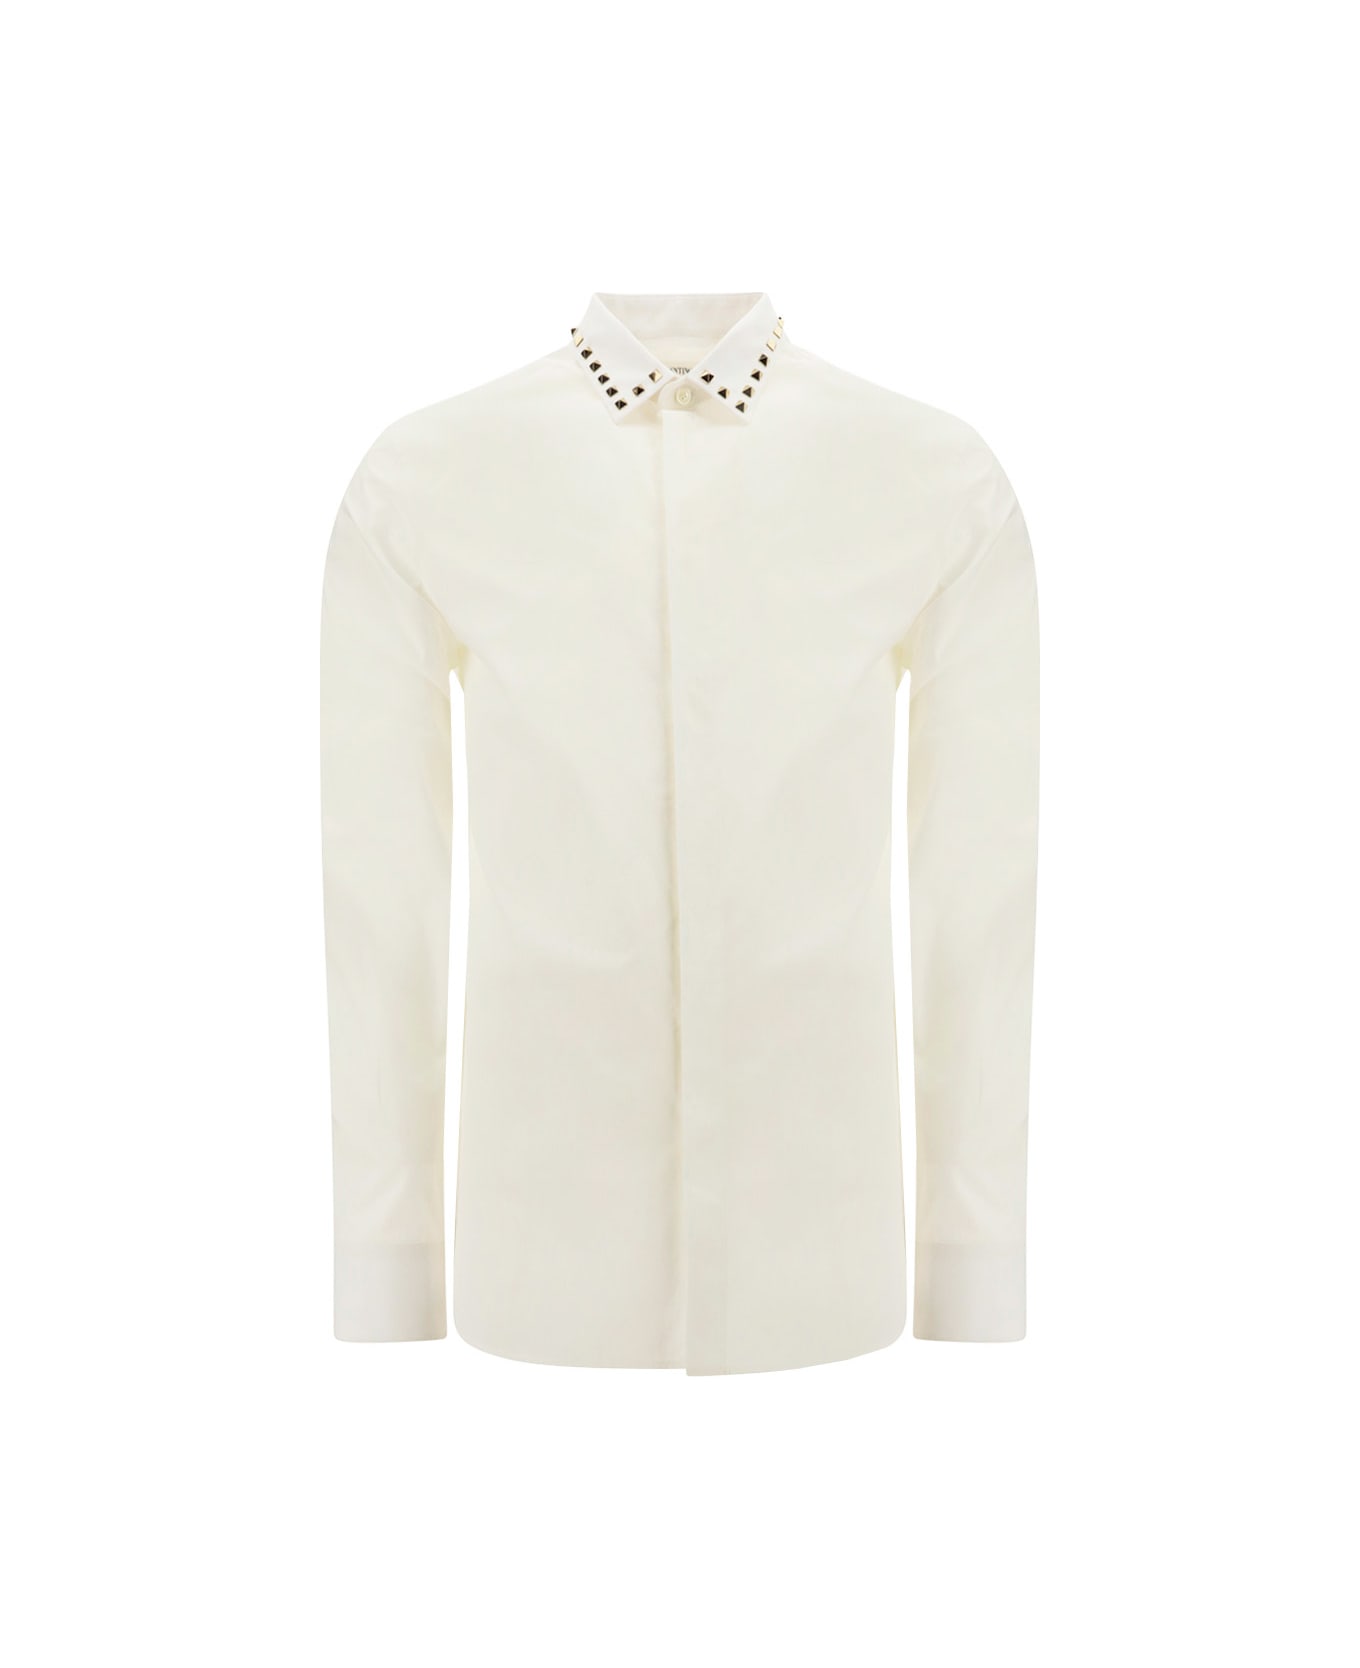 Valentino White Shirt With Studs On The Collar - White シャツ